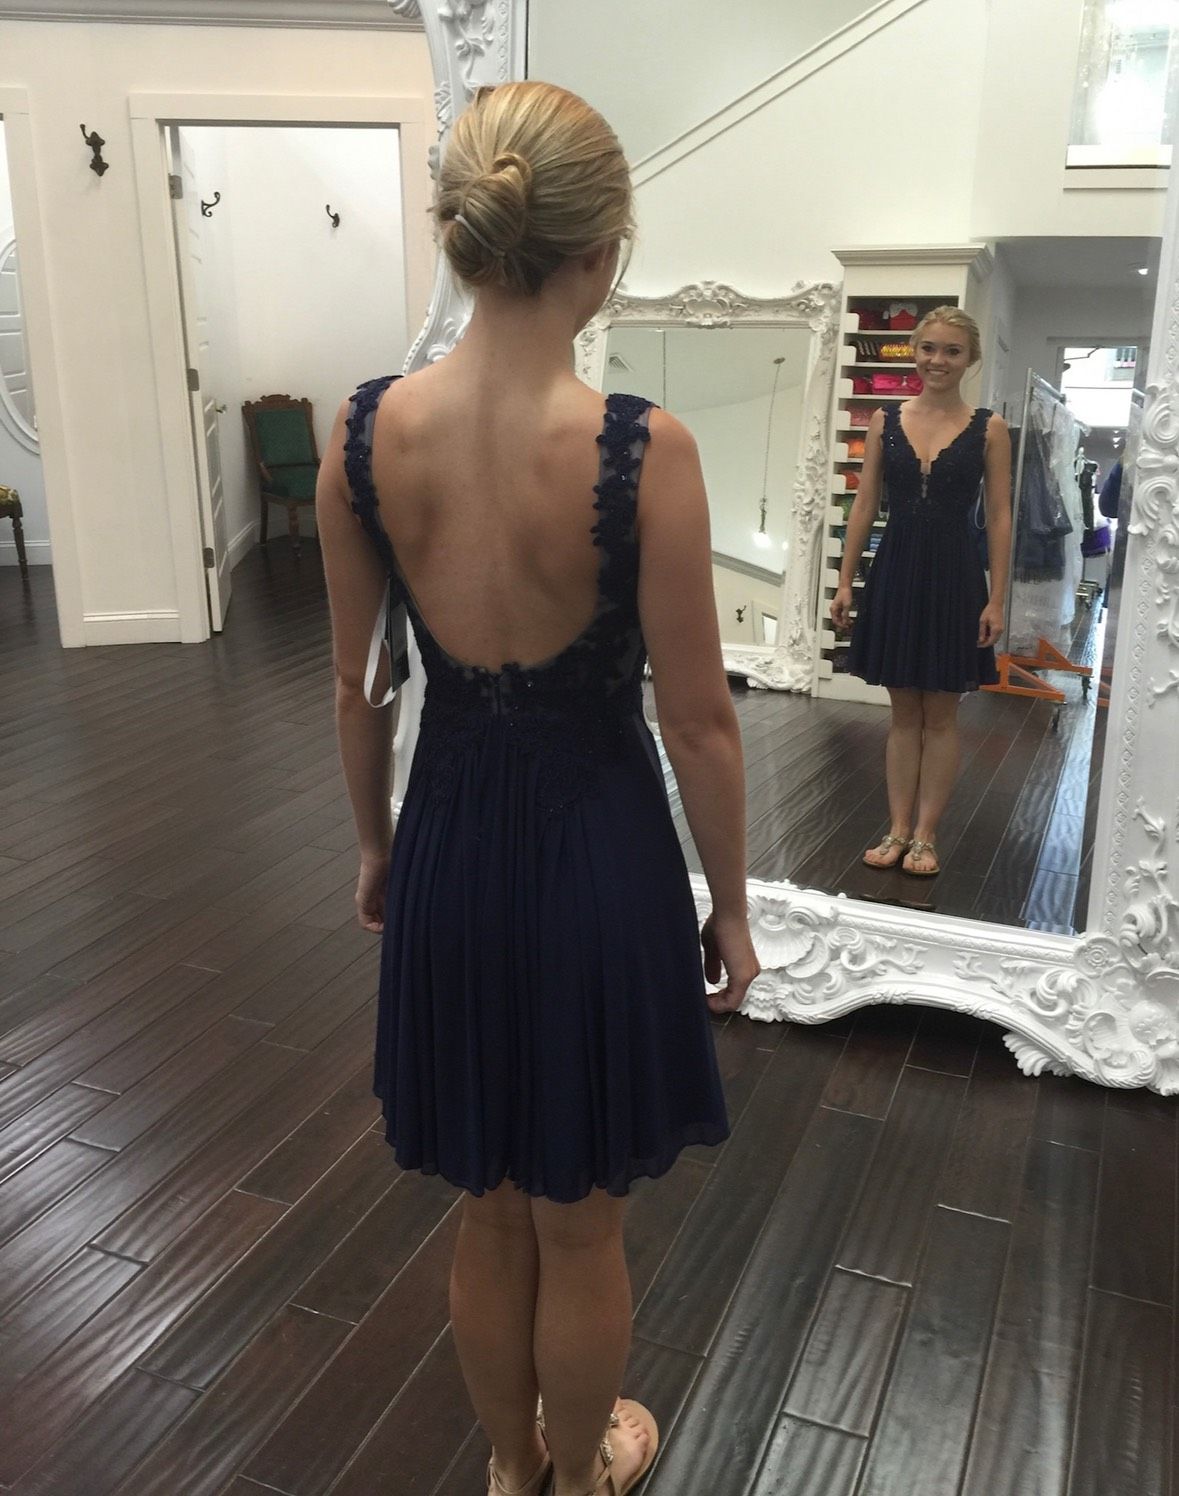 Sherri Hill Size 00 Prom Plunge Lace Navy Blue A-line Dress on Queenly